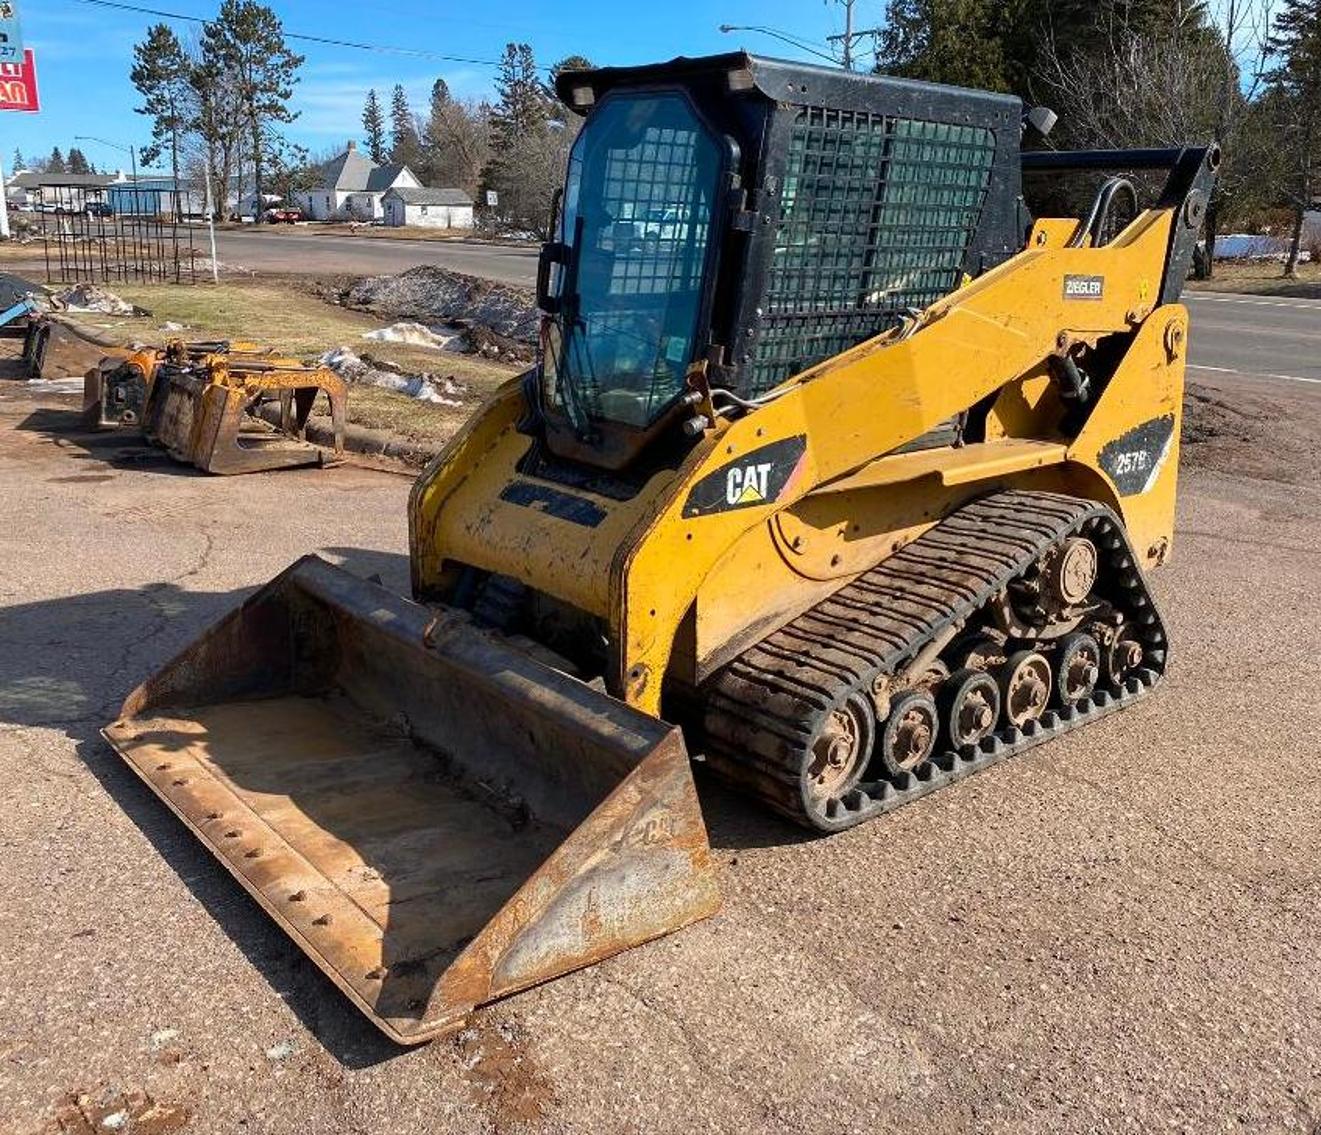 Rental Shop Discontinuing Business, Surplus Excavating Equipment, Fish House, and Horse Equipment